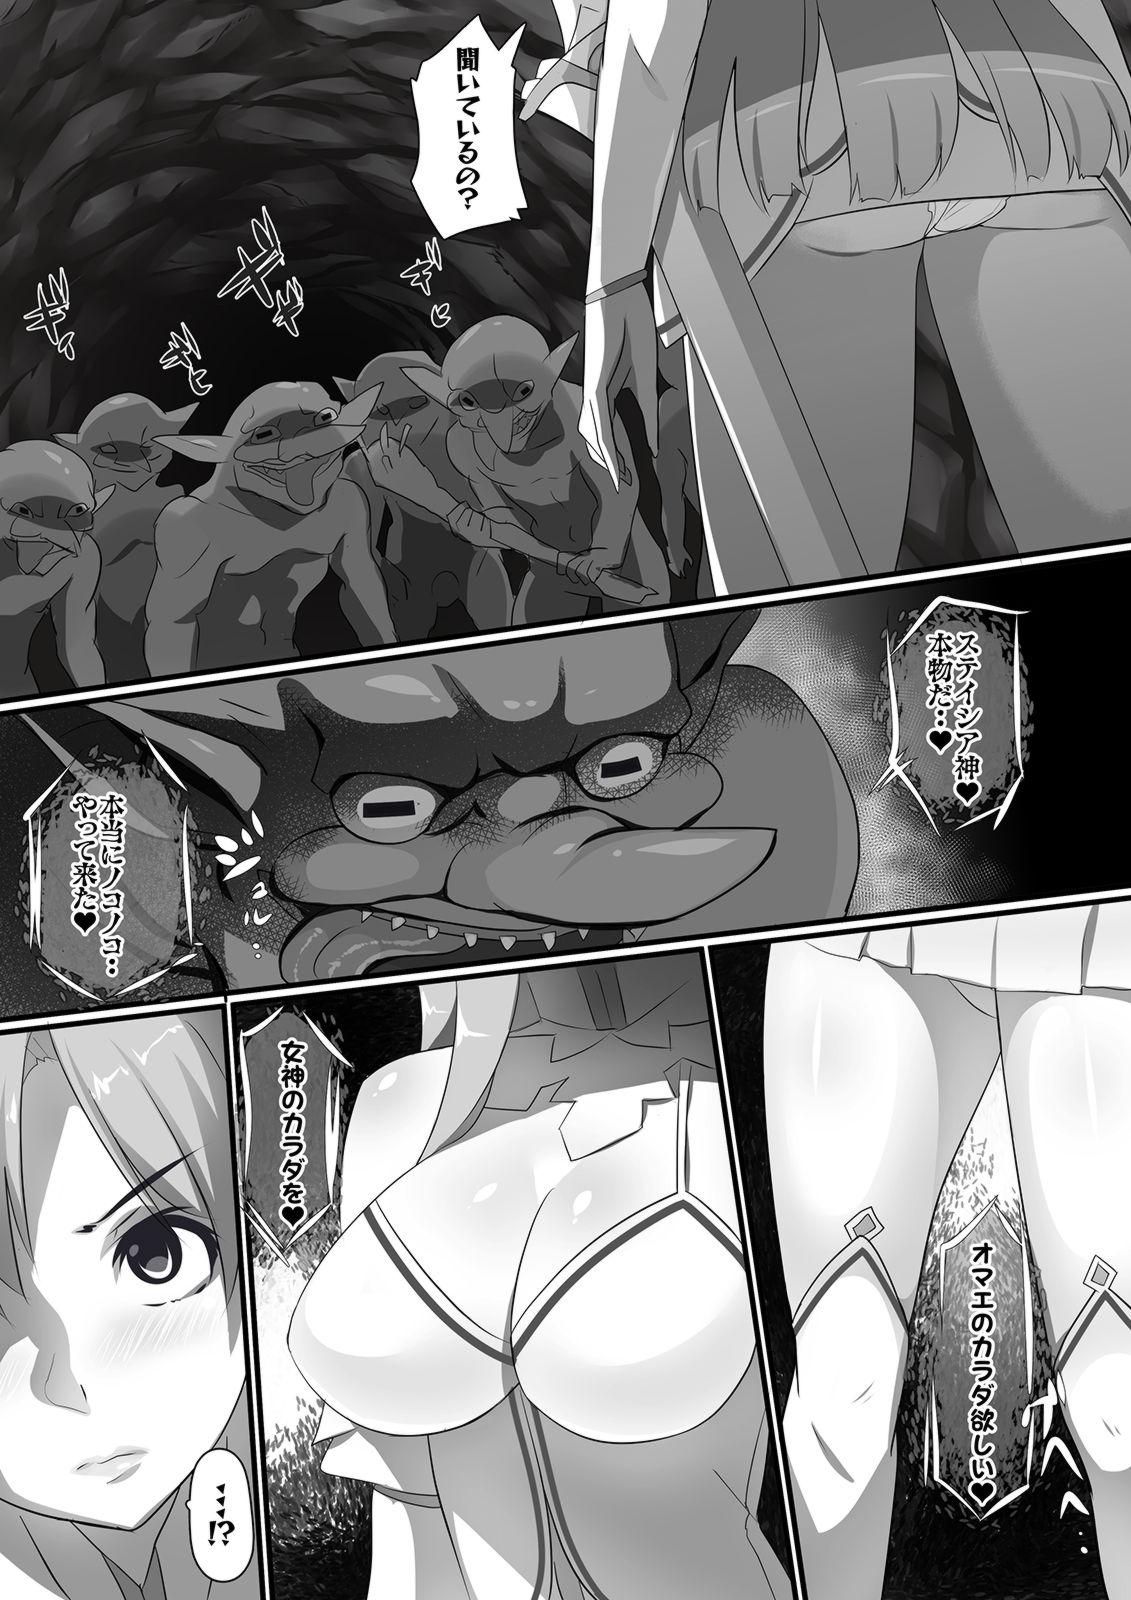 Colombia SAO Wana Ha Stasia - Sword art online Pussy Licking - Page 7